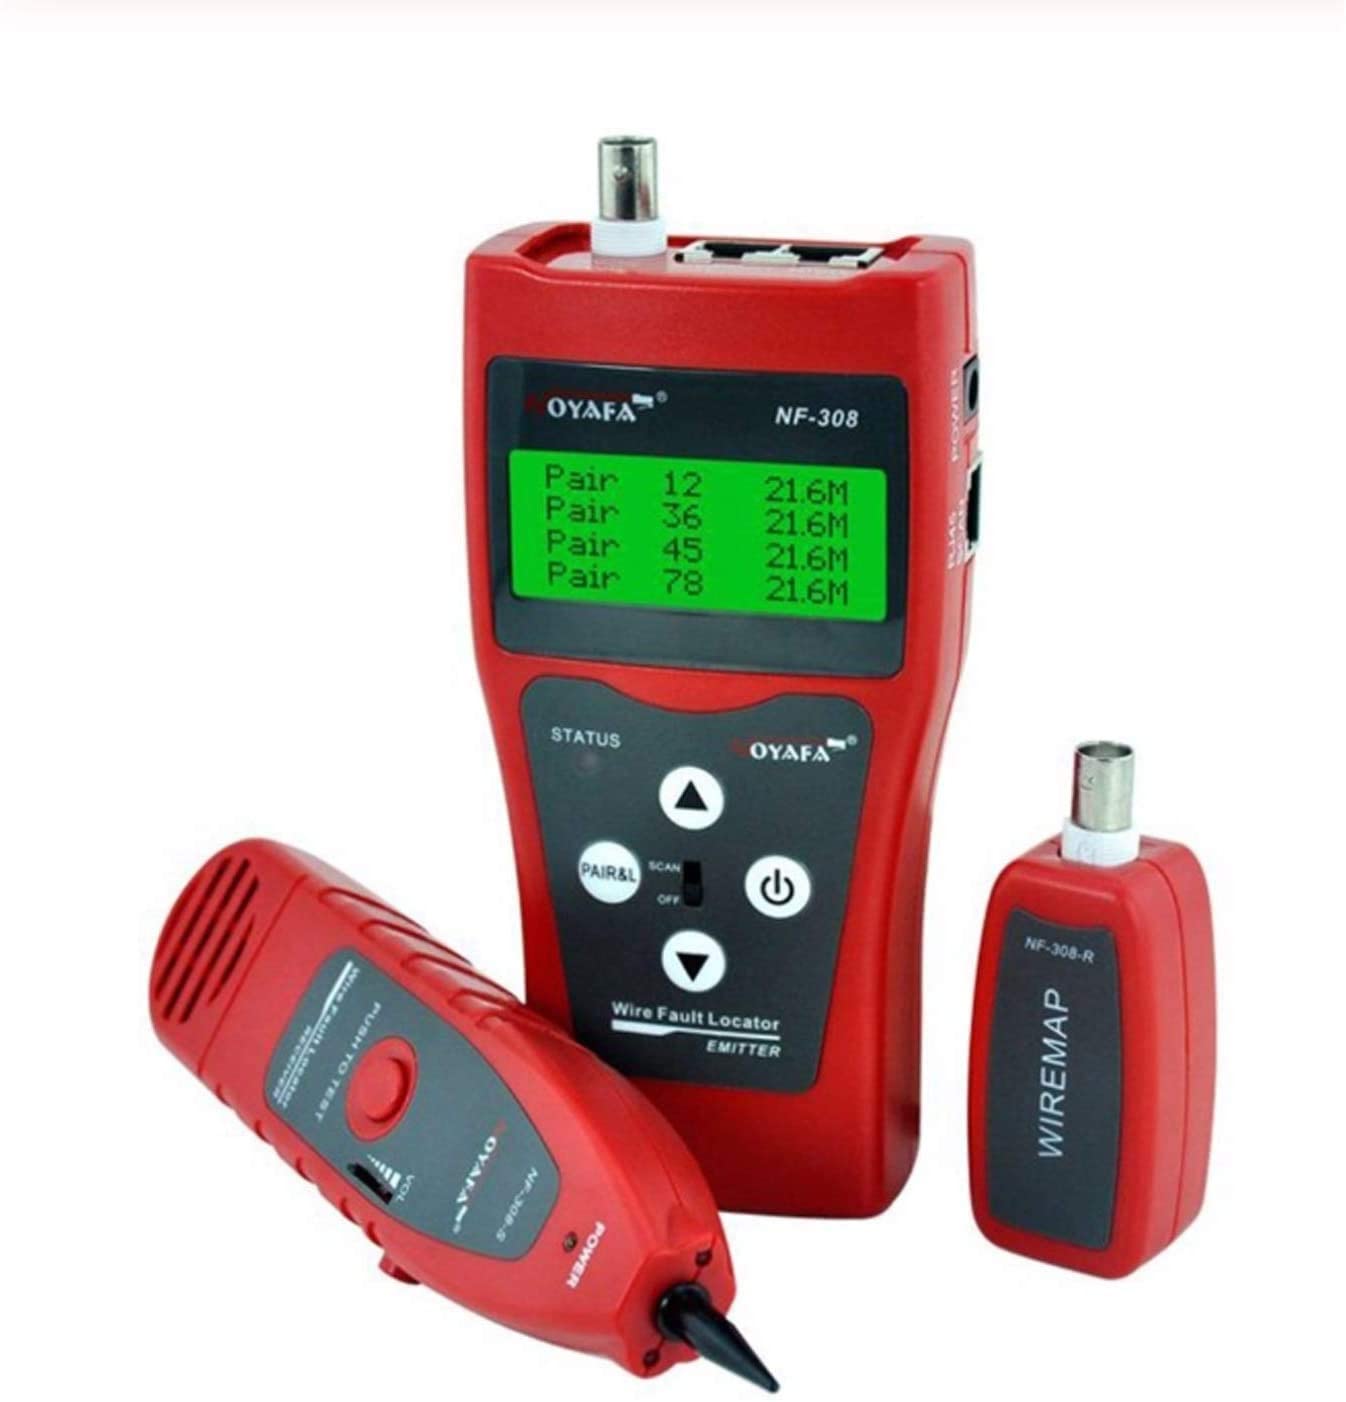 Wire fault locator NF-308